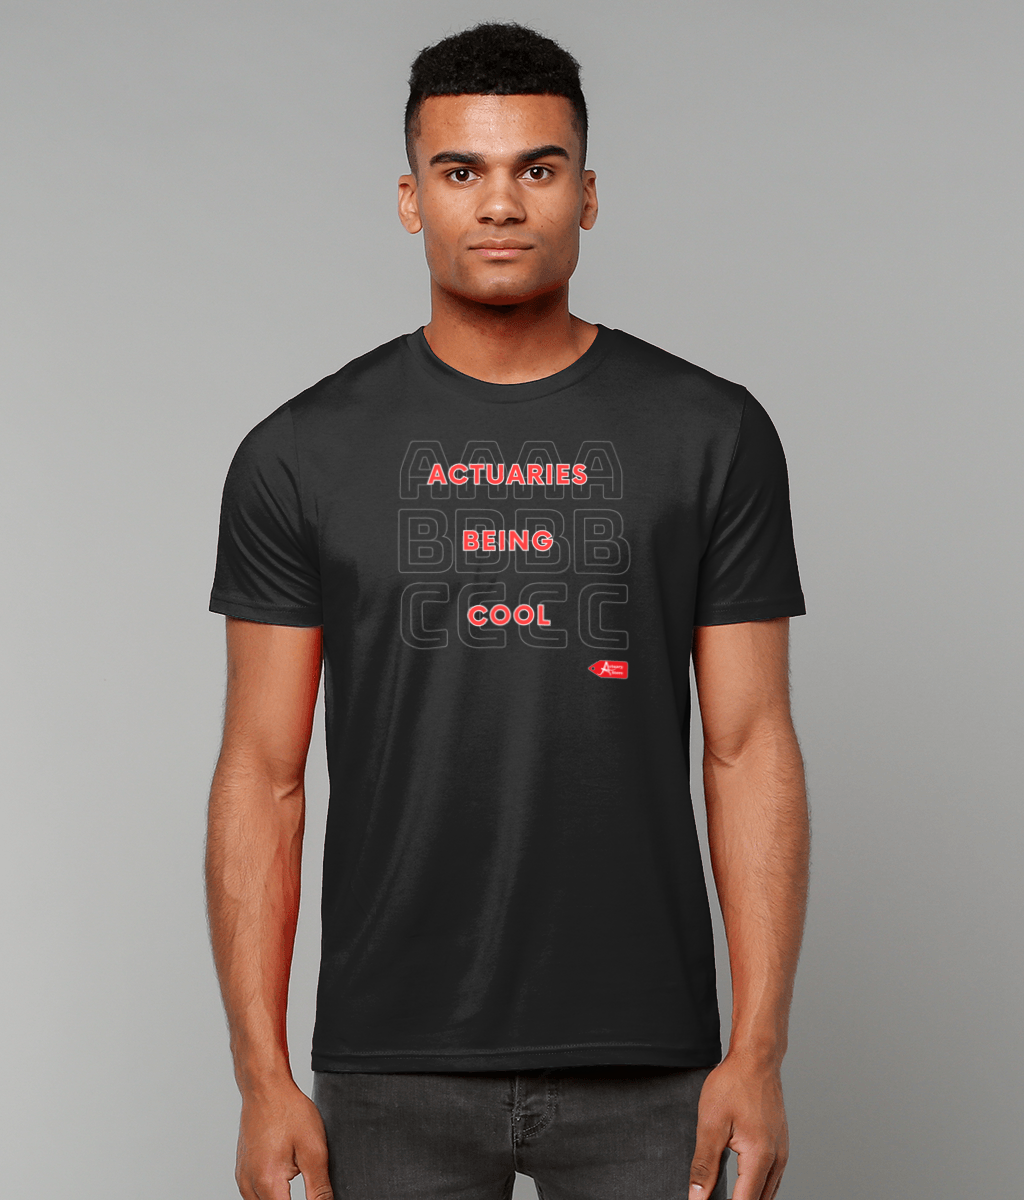 ABC - Actuaries Being Cool Black T-Shirt